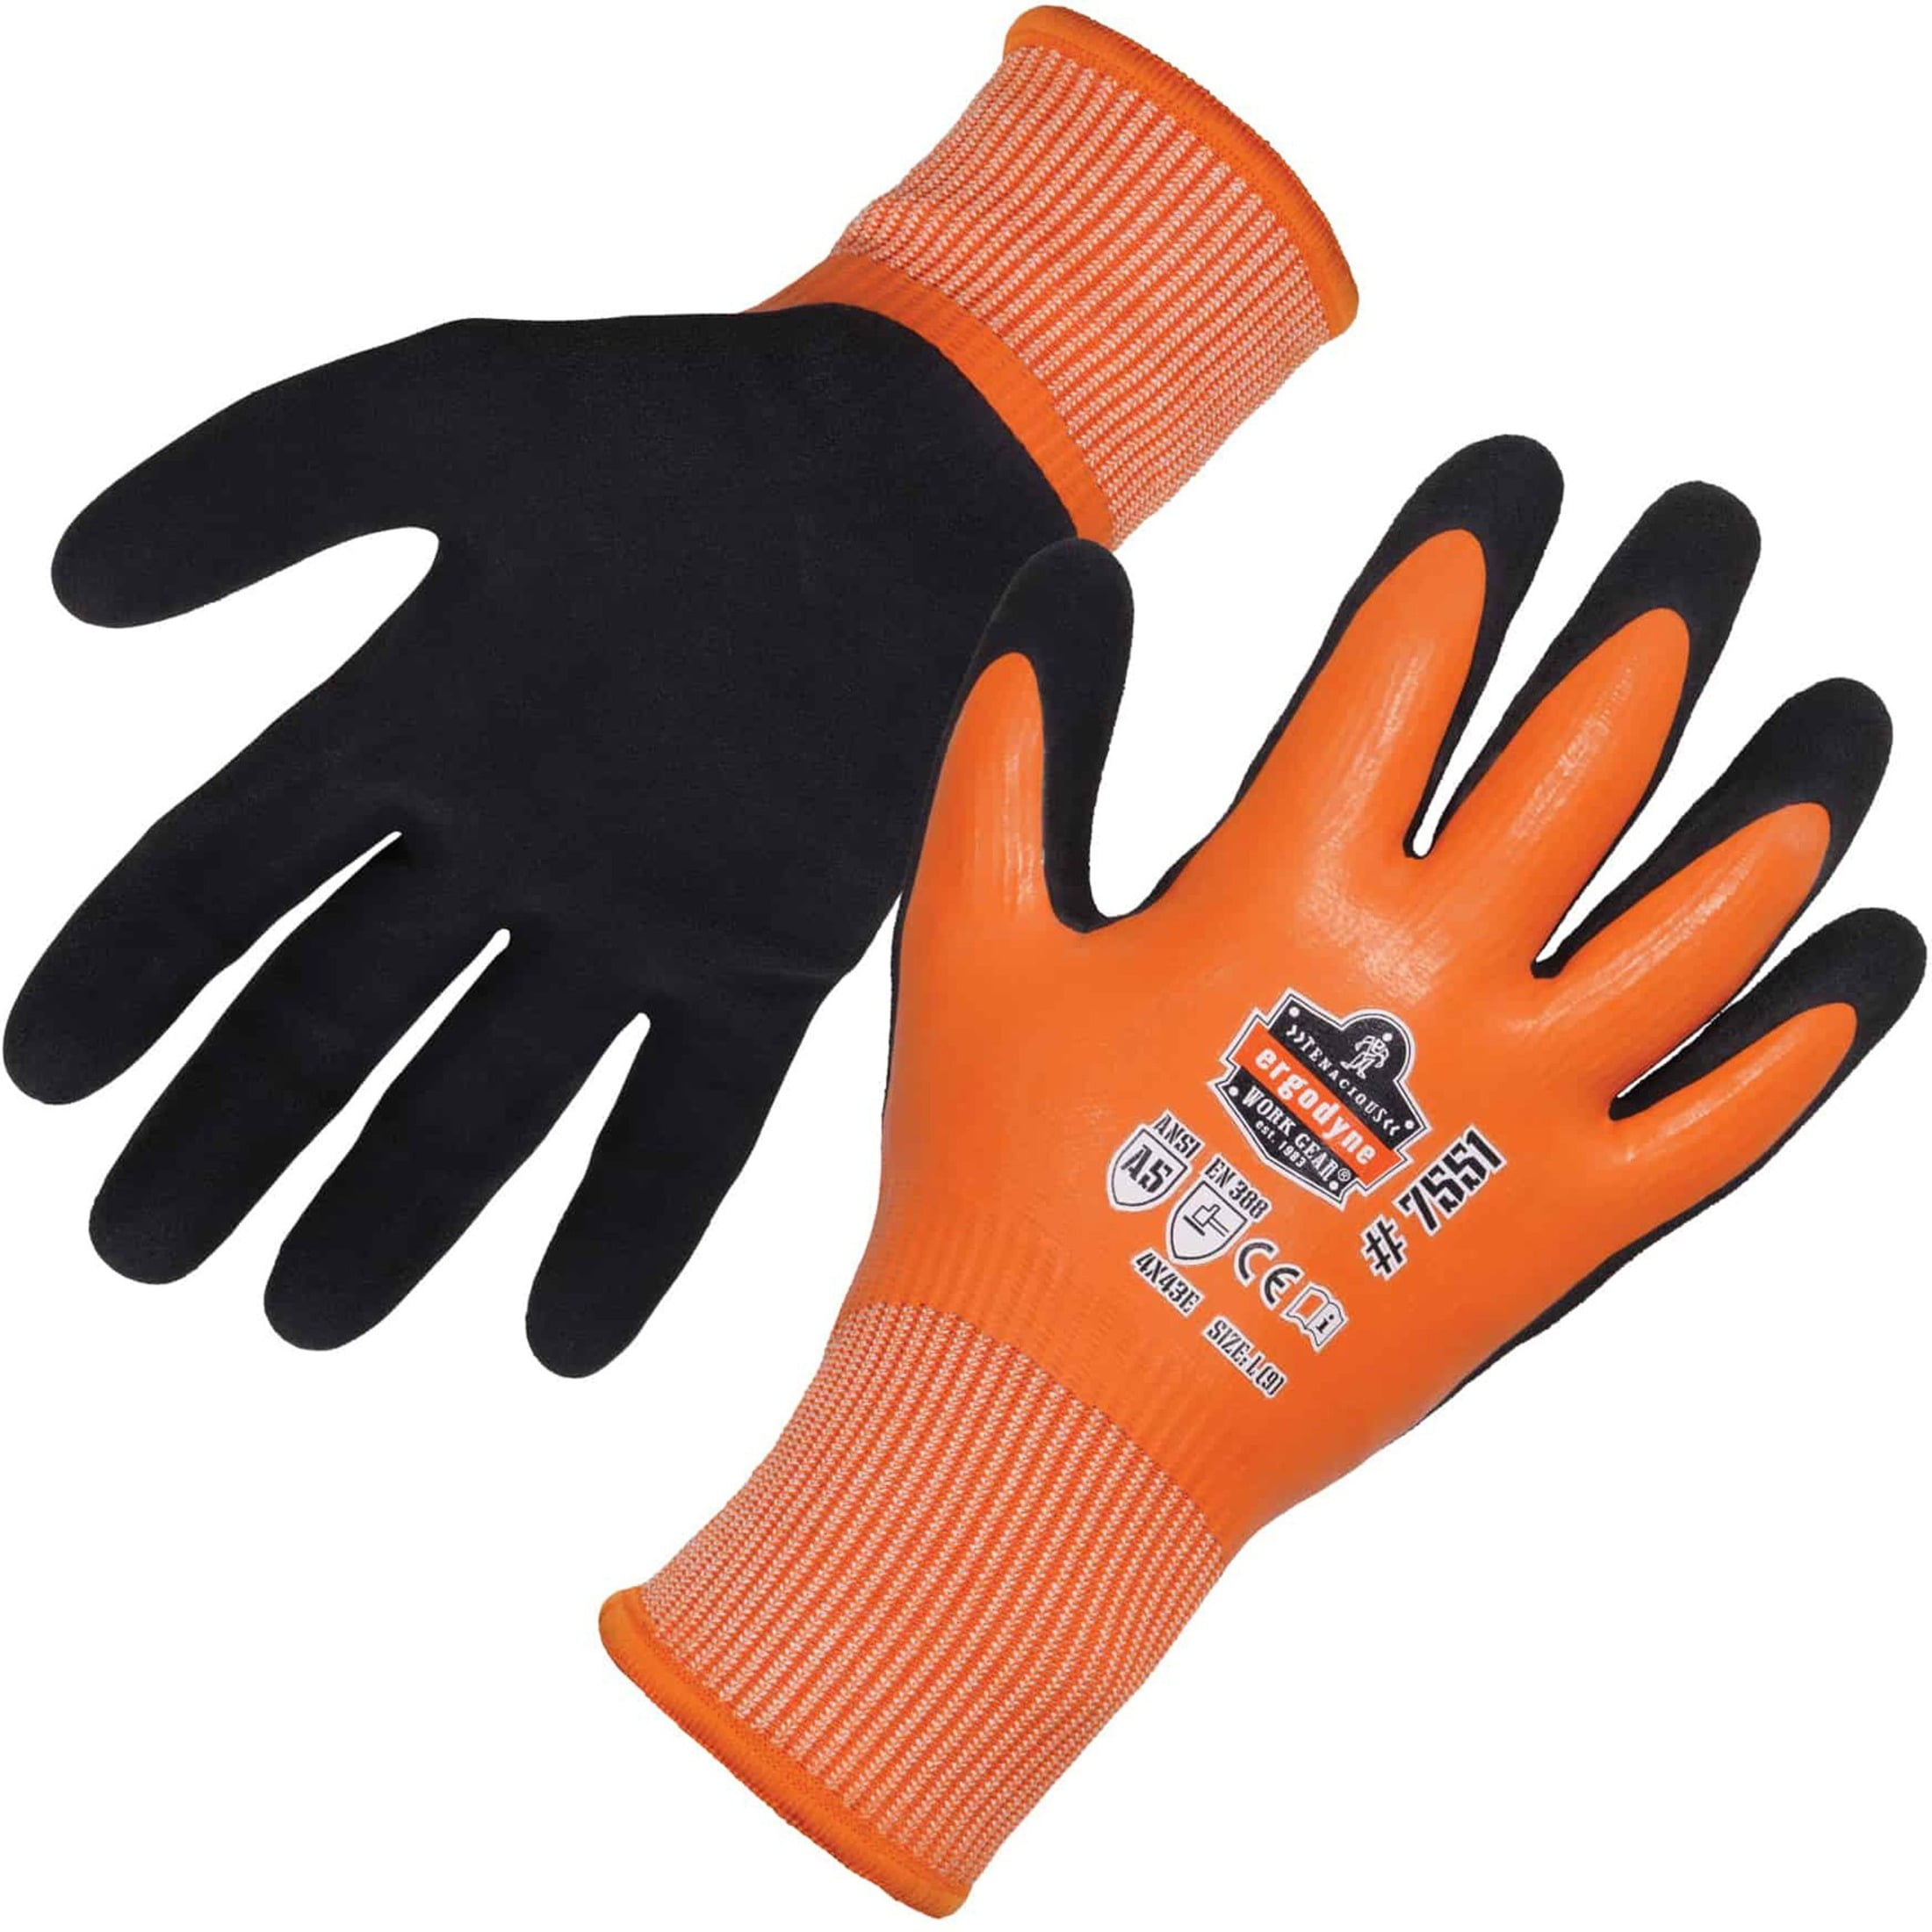 Waterproof Insulated Thermal Work Gloves KG140W Full Hand Latex Coated 